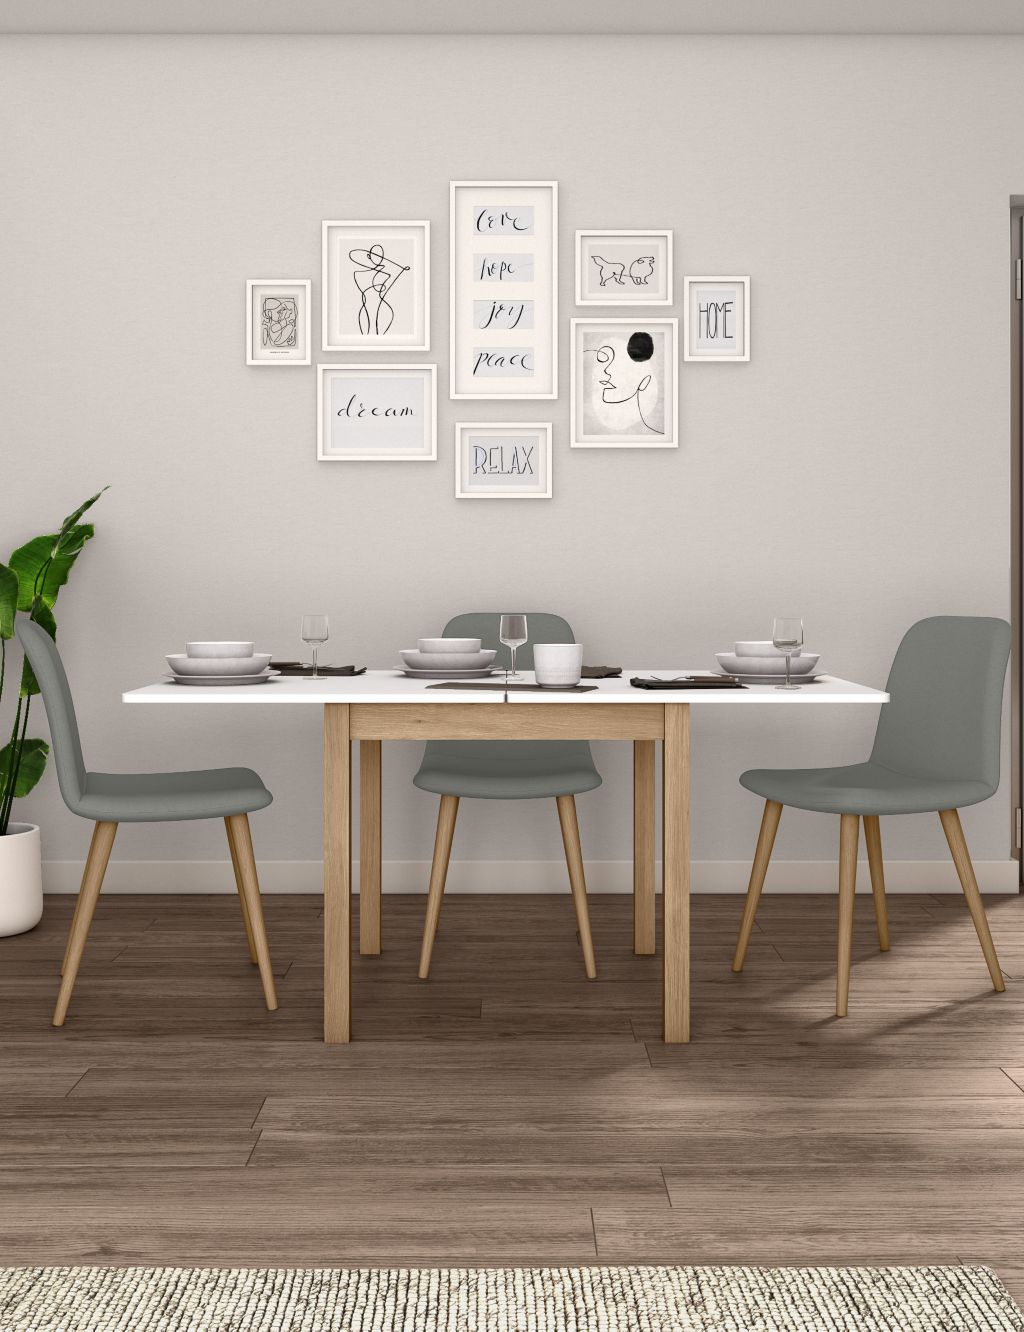 4-6 Seater Extending Dining Table